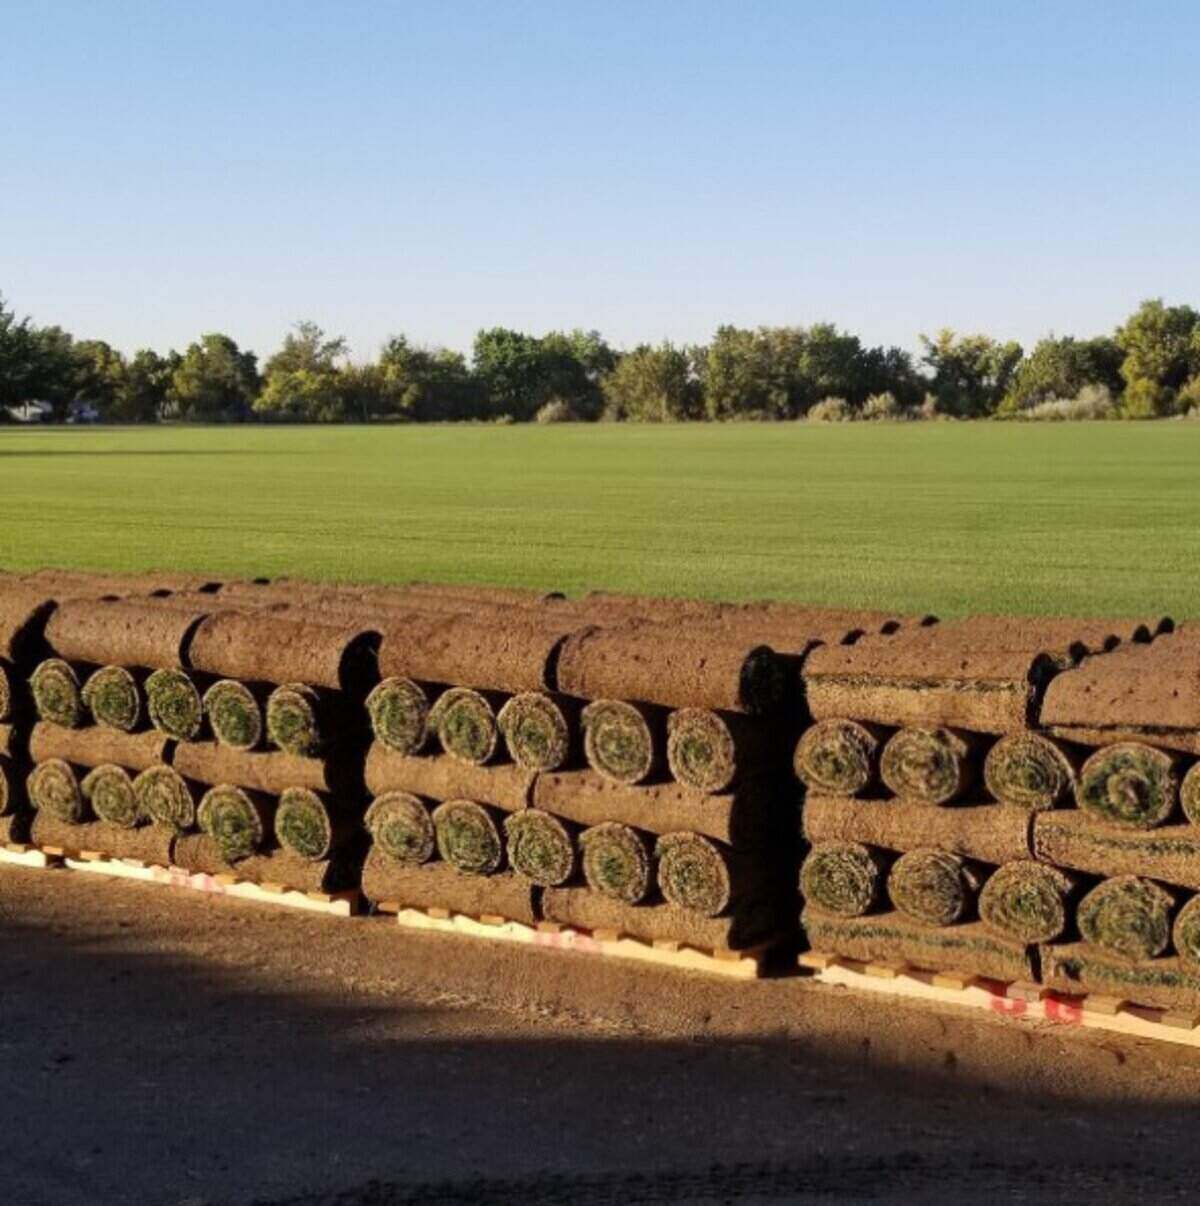 Harvested sod, ready for delivery